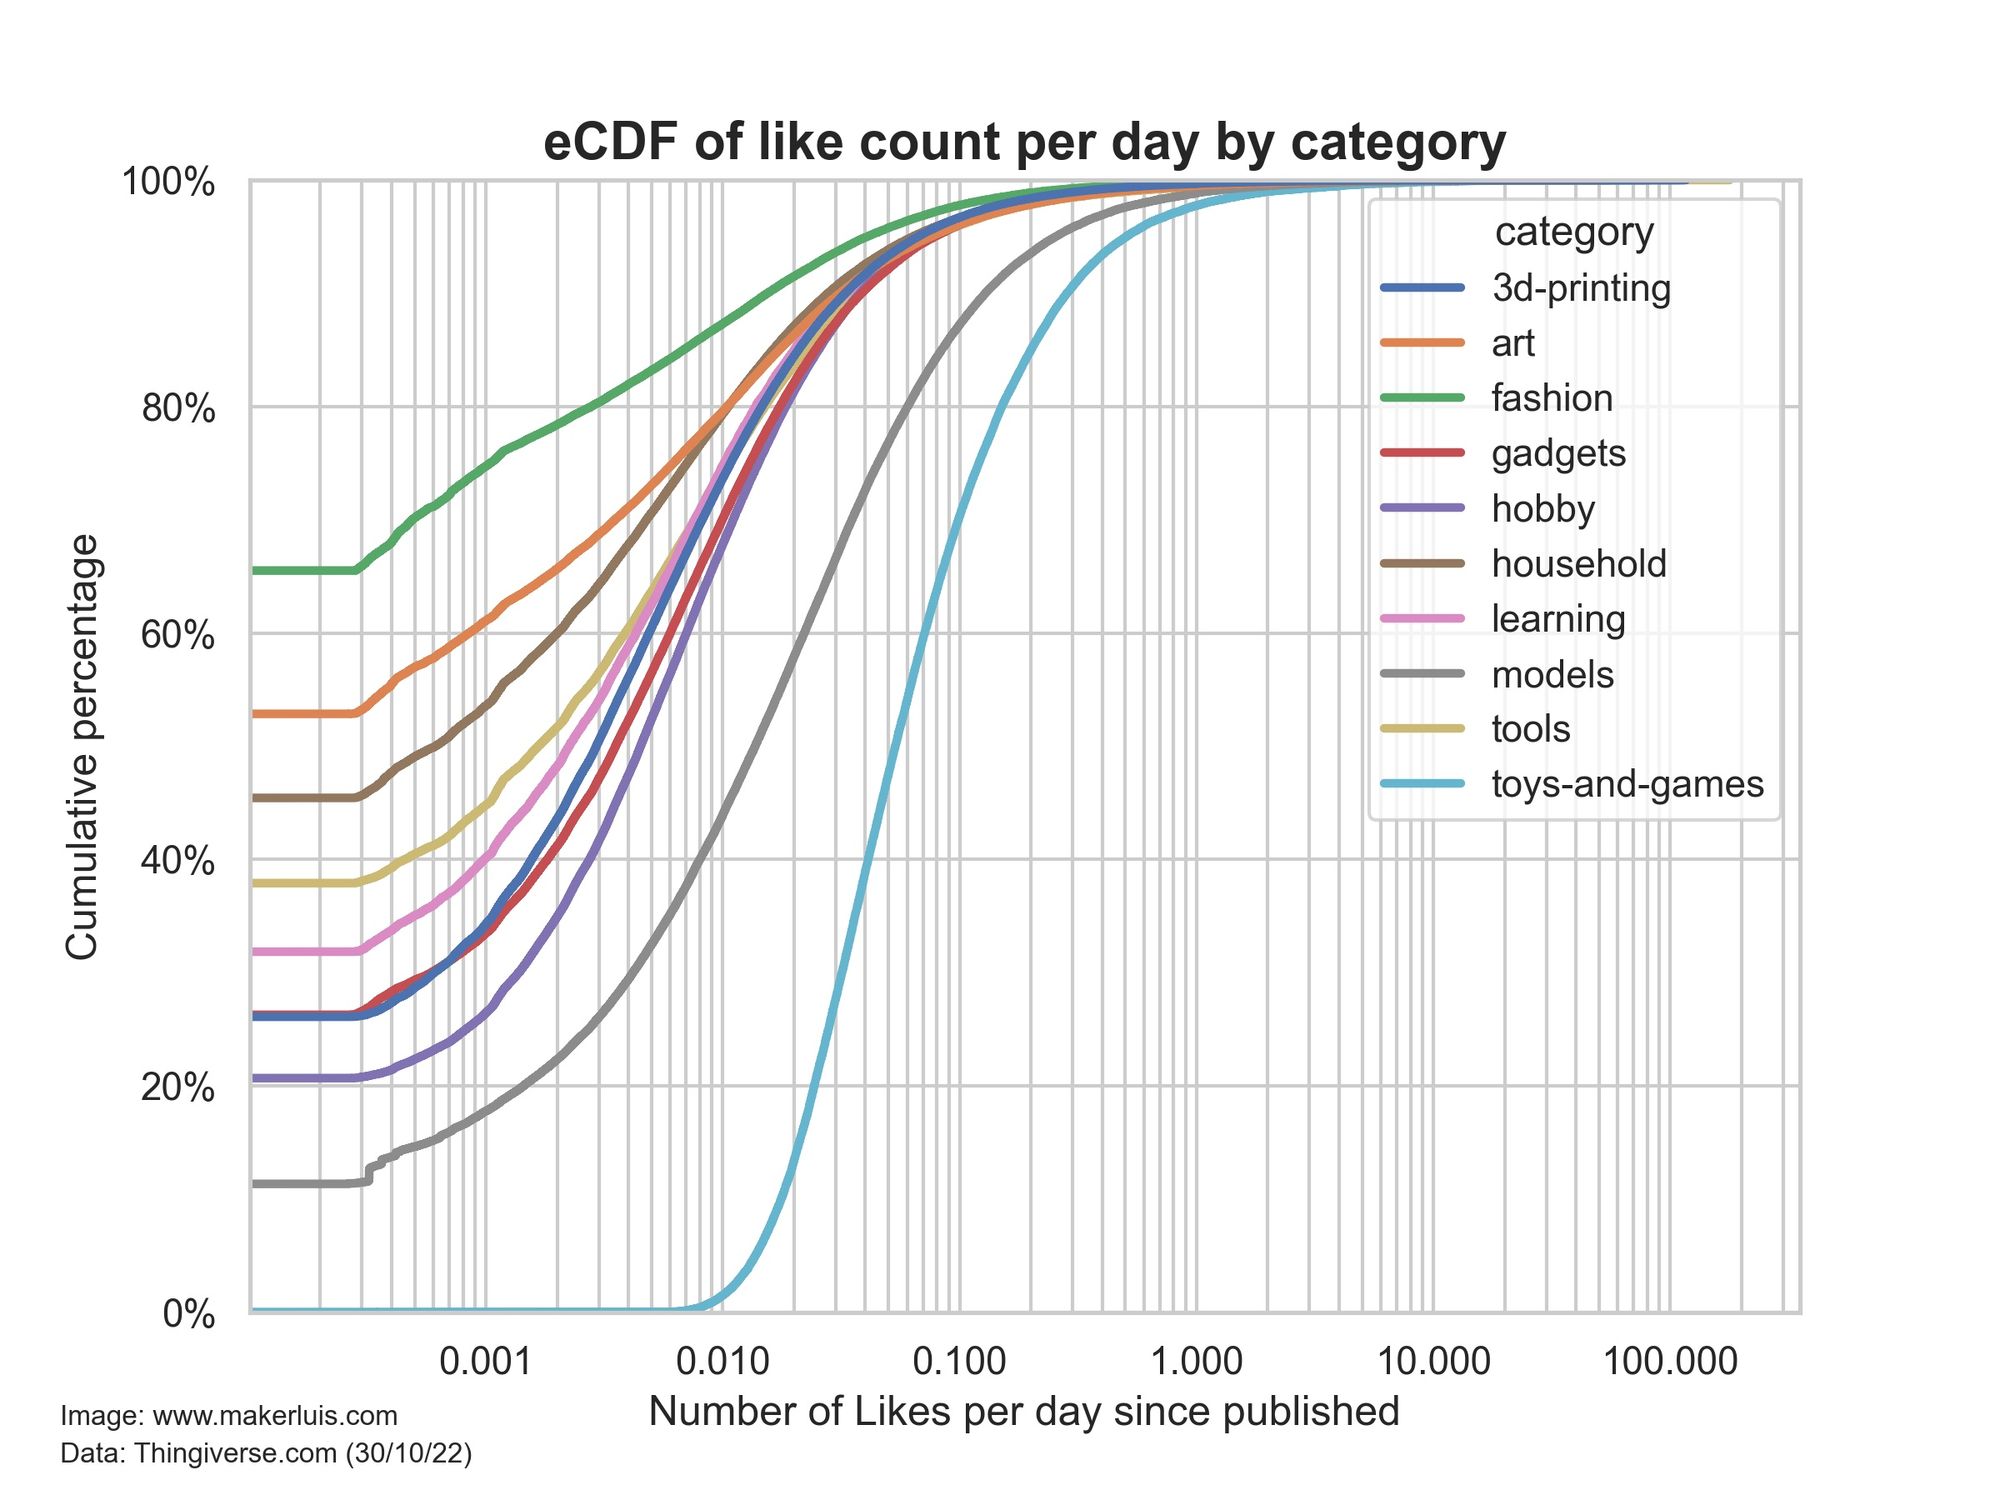 Empirical cummulative density plot showing the proportion of items for different categories of 3D printed objects having different numbers of likes. The categories are indicated by colors, and the x axis, showing the average number of likes per day since the item was published is in logarithmic scale